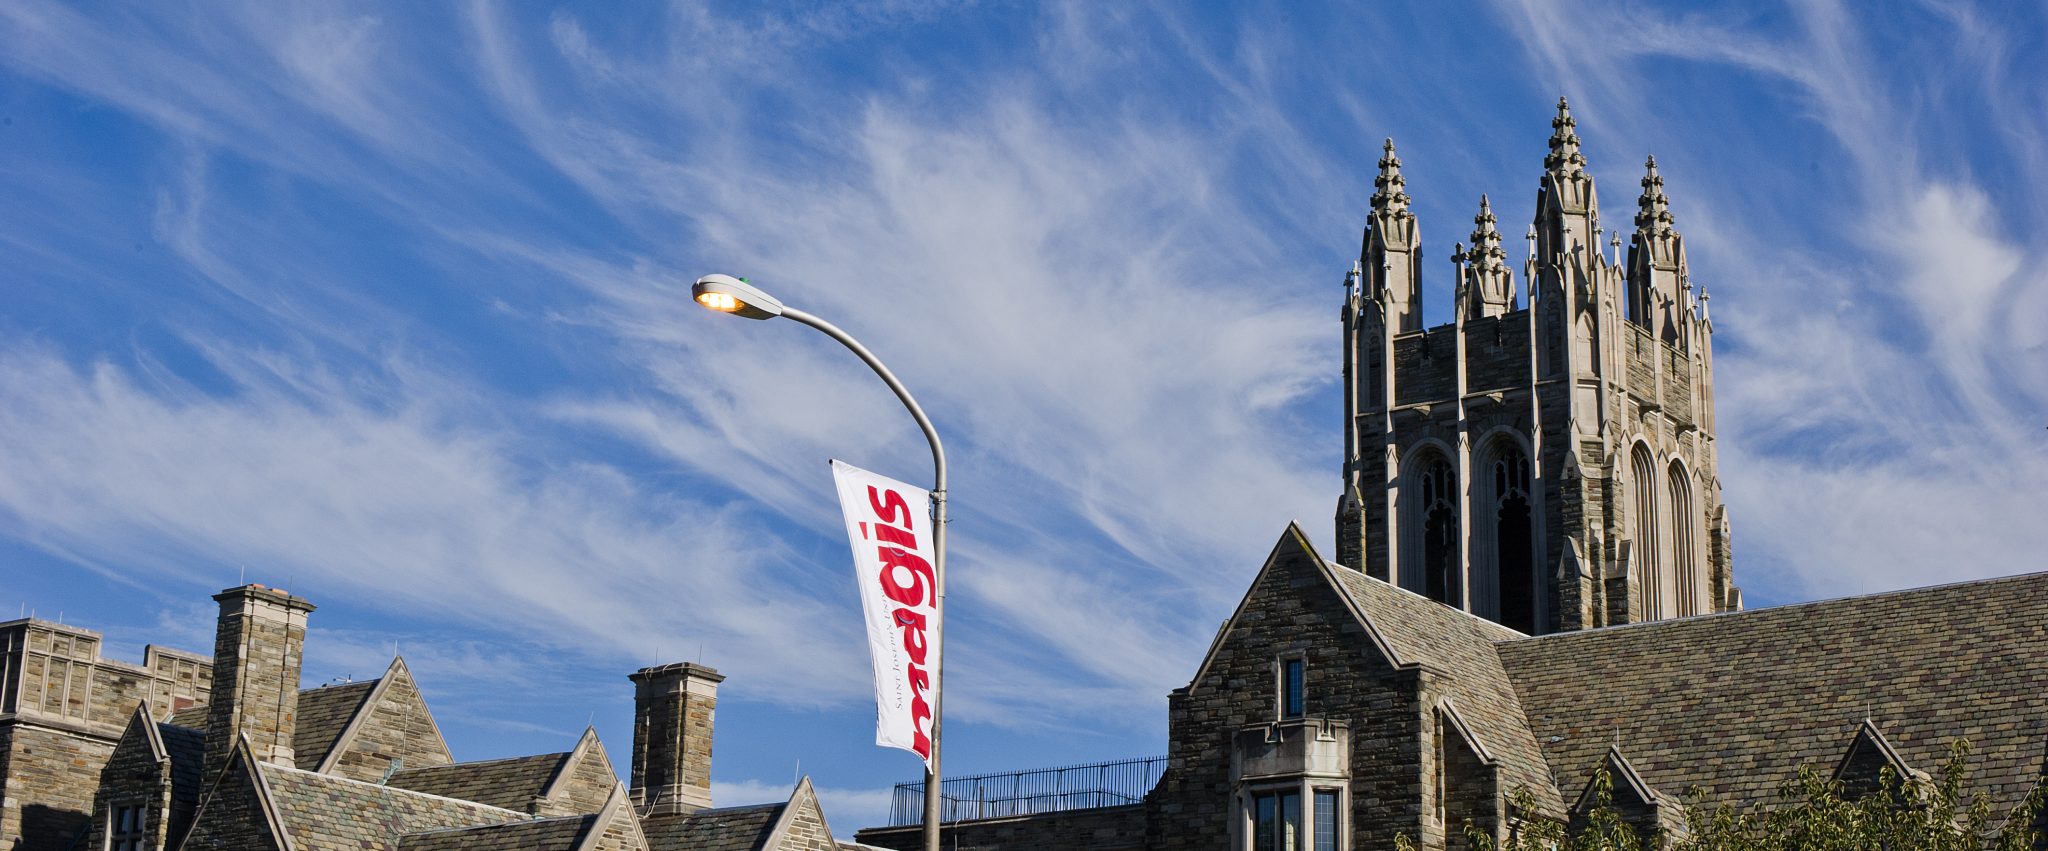 Barbelin Tower and a flag that reads MAGIS at Saint Joseph's University